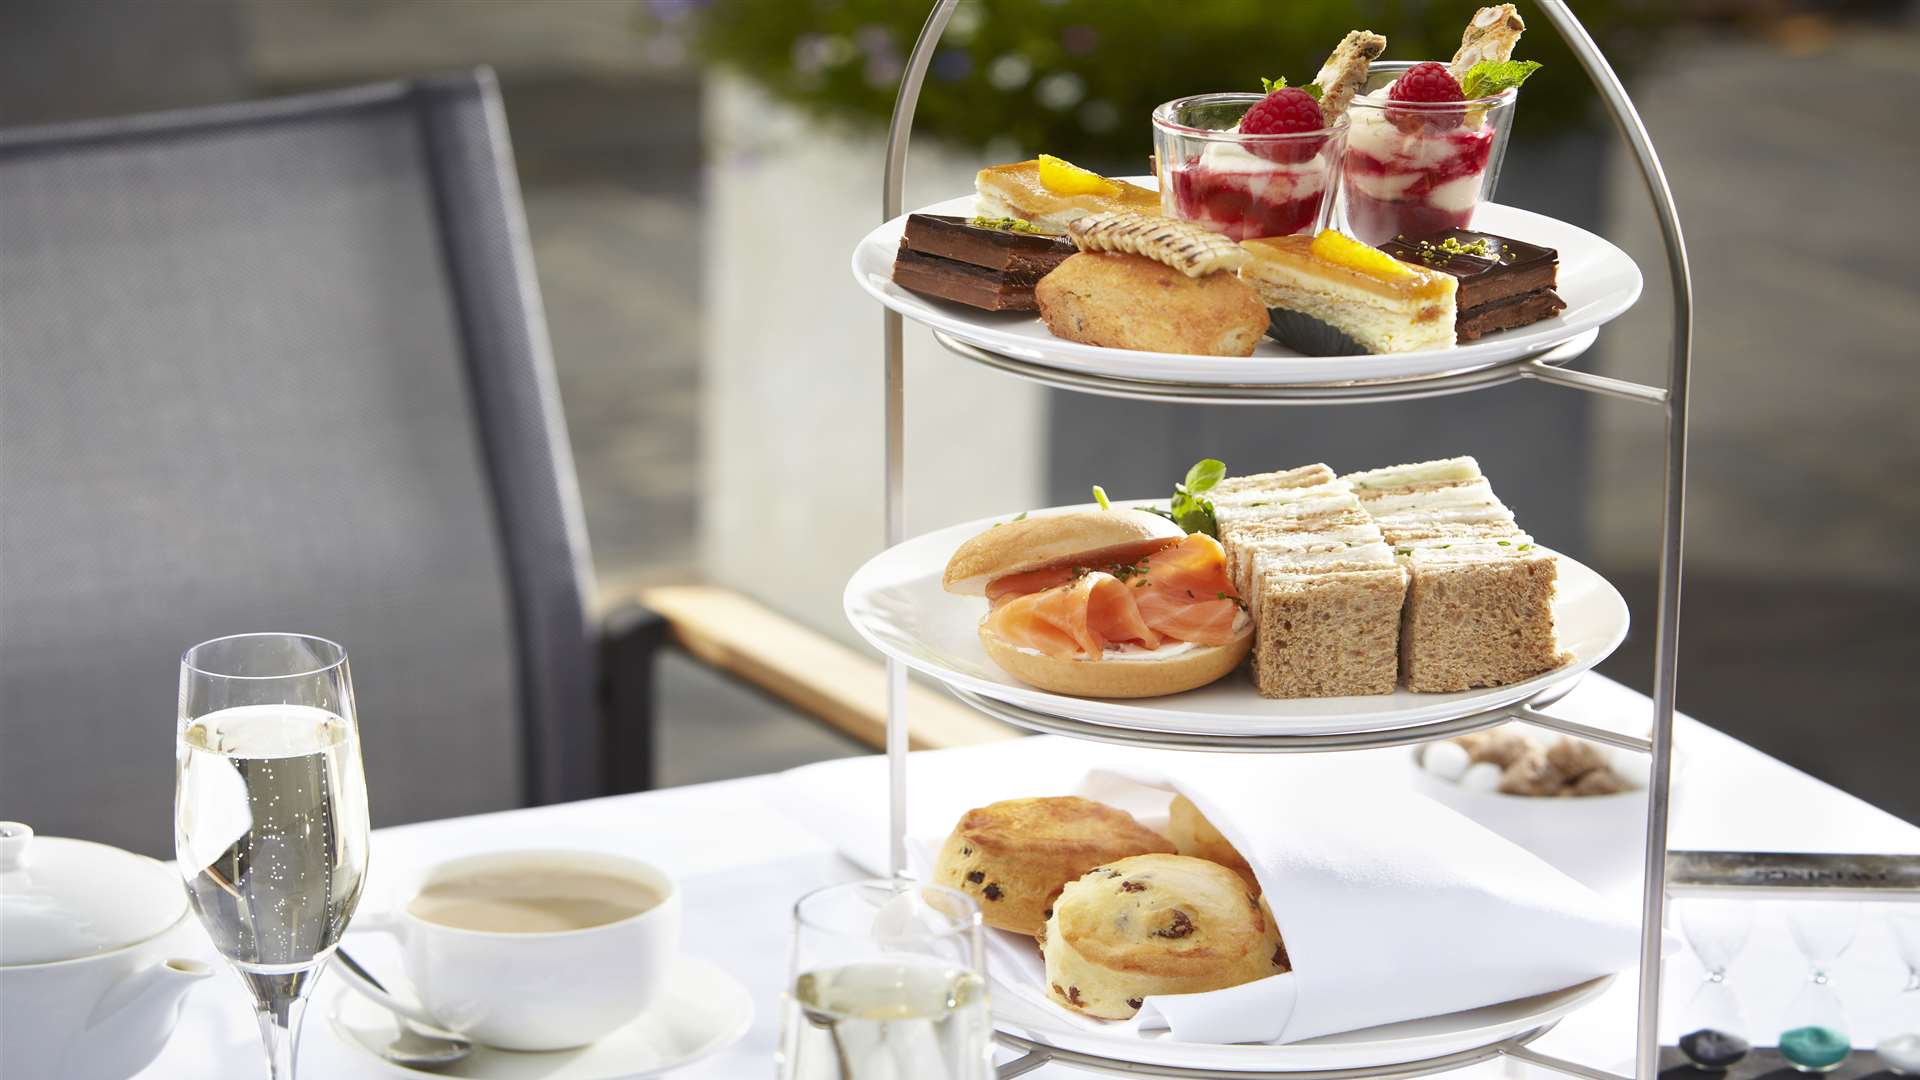 Afternoon tea at the Rowhill Grange Hotel